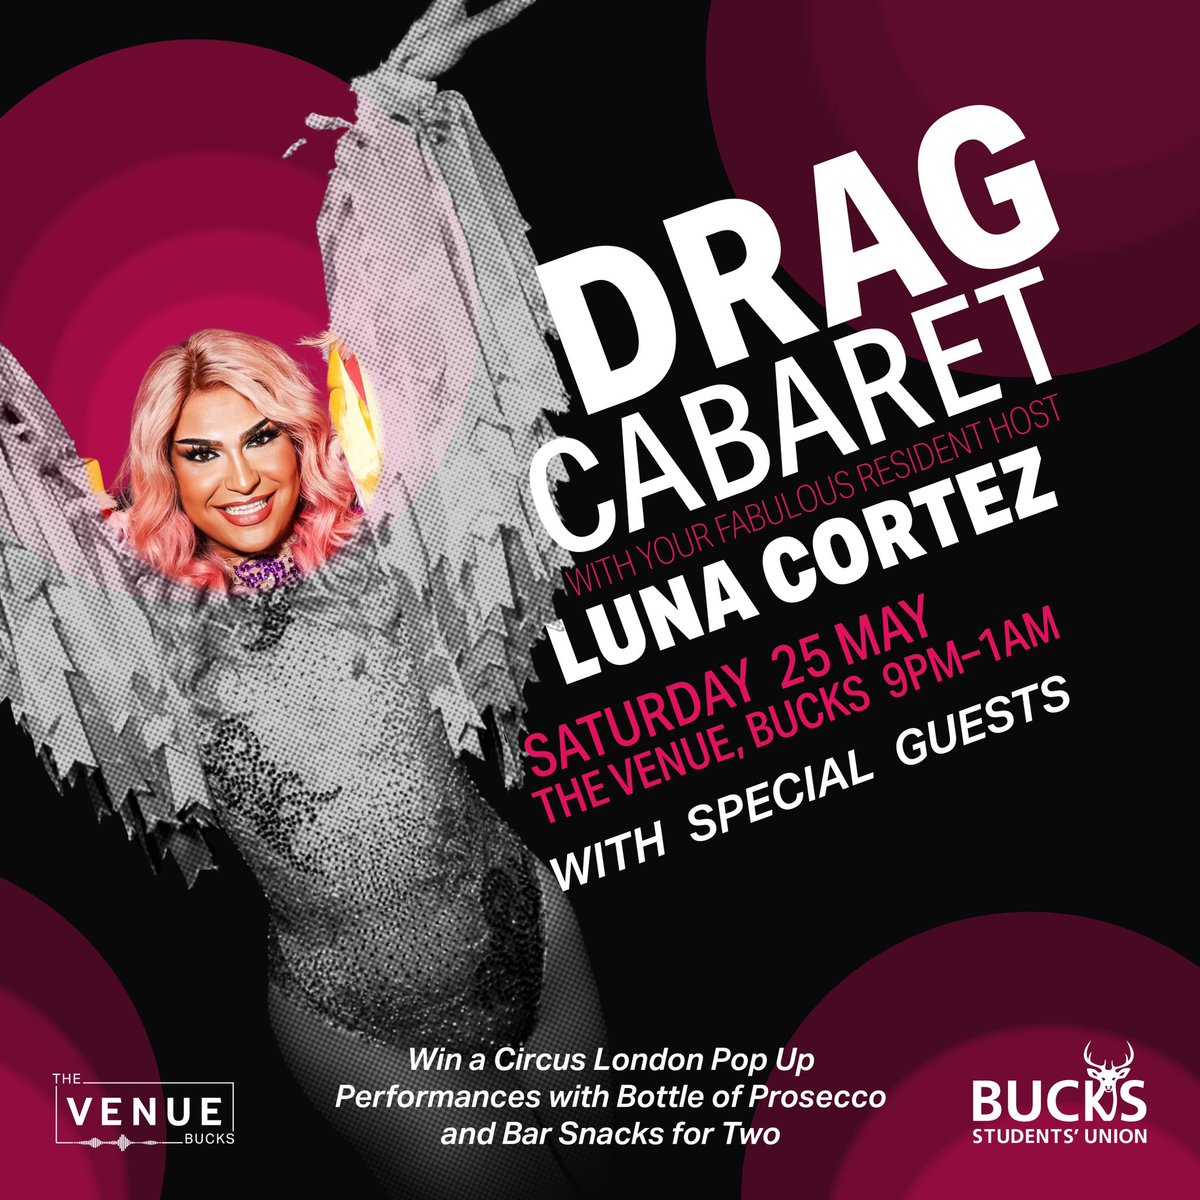 DRAG CABARET is back 😍 This month you will be joined by our fabulous host Luna Cortez with some special guests! Our prize this month is a Circus London Pop Up Performance with a Bottle of Prosecco and Bar Snacks for Two! 🍾 📅Saturday 25 May ⏰9pm - 1am 📍The Venue